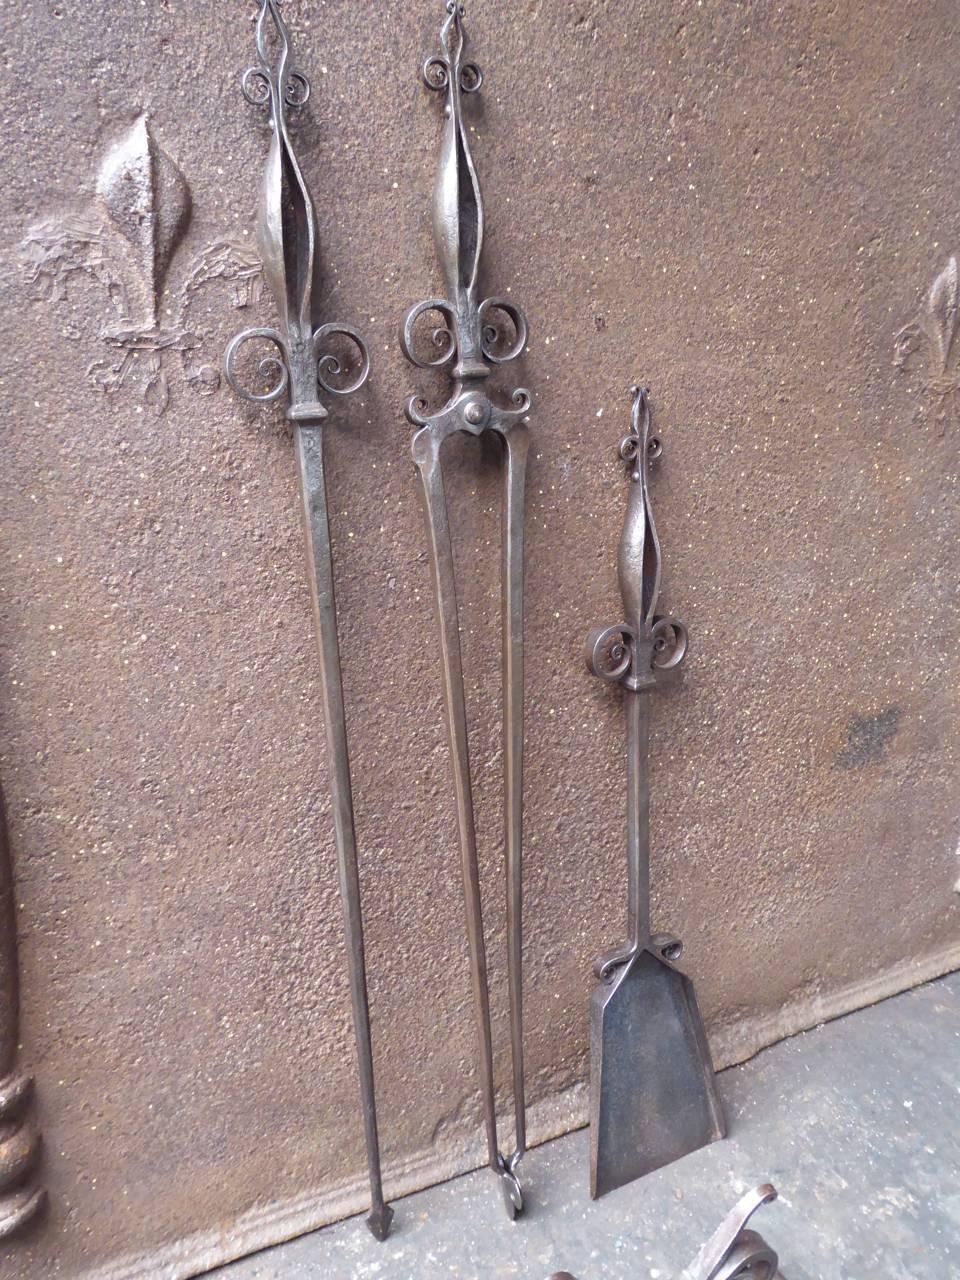 Early 20th century Dutch Art Nouveau fireplace tool set - fire irons made of wrought iron.

We have a unique and specialized collection of antique and used fireplace accessories consisting of more than 1000 listings at 1stdibs. Amongst others we